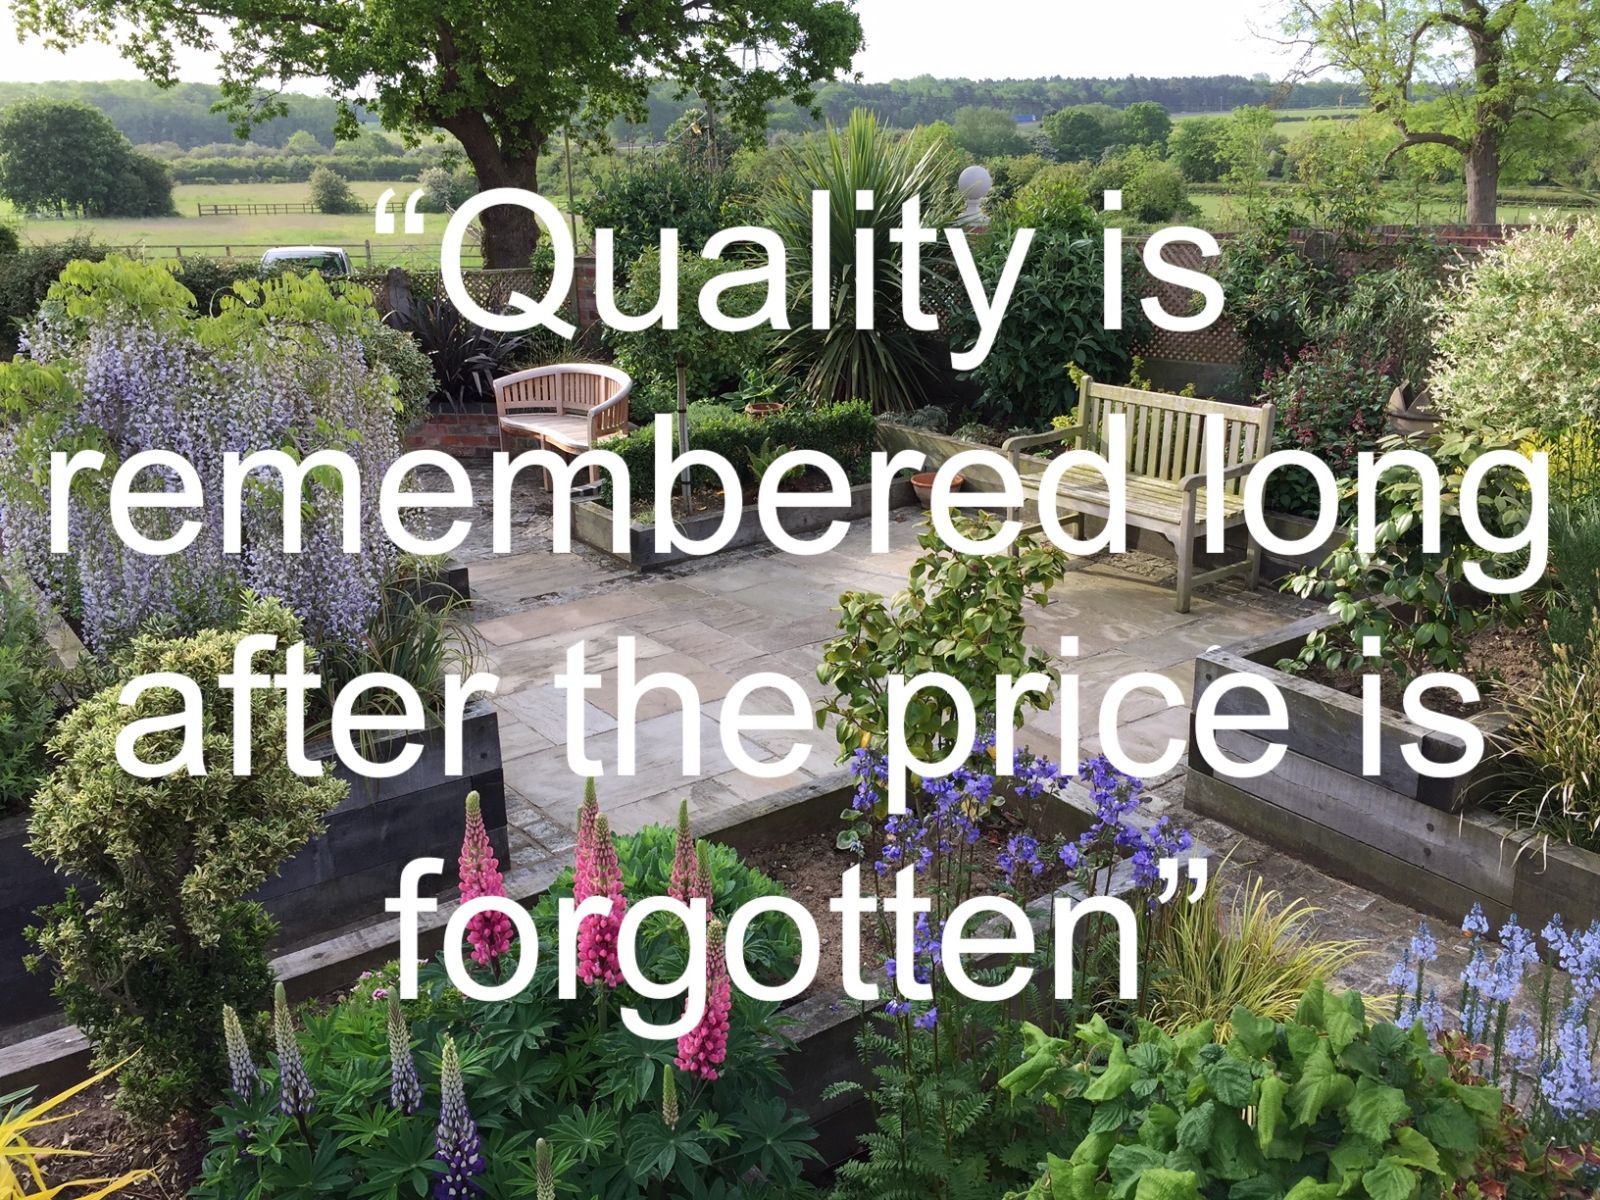 Remembering quality not just price when choosing a landscaper with railway sleepers. Railwaysleepers.com